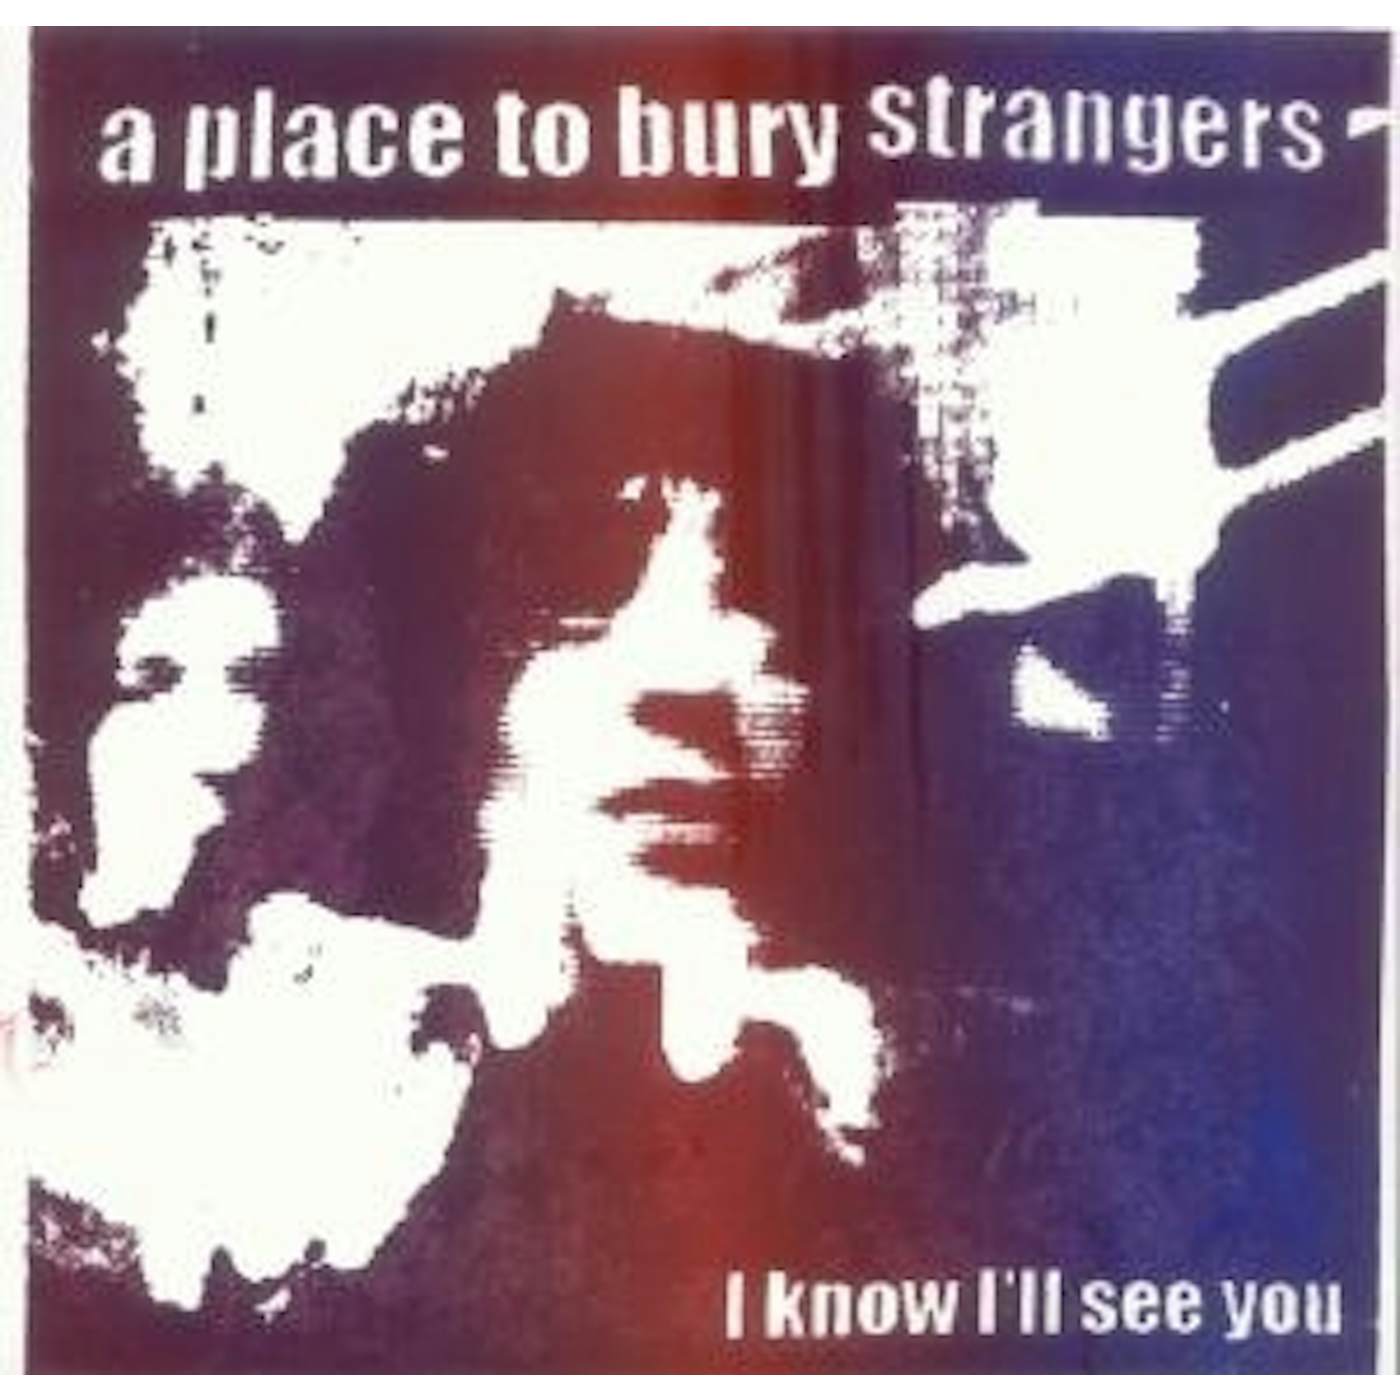 A Place To Bury Strangers I KNOW I'LL SEE YOU Vinyl Record - UK Release